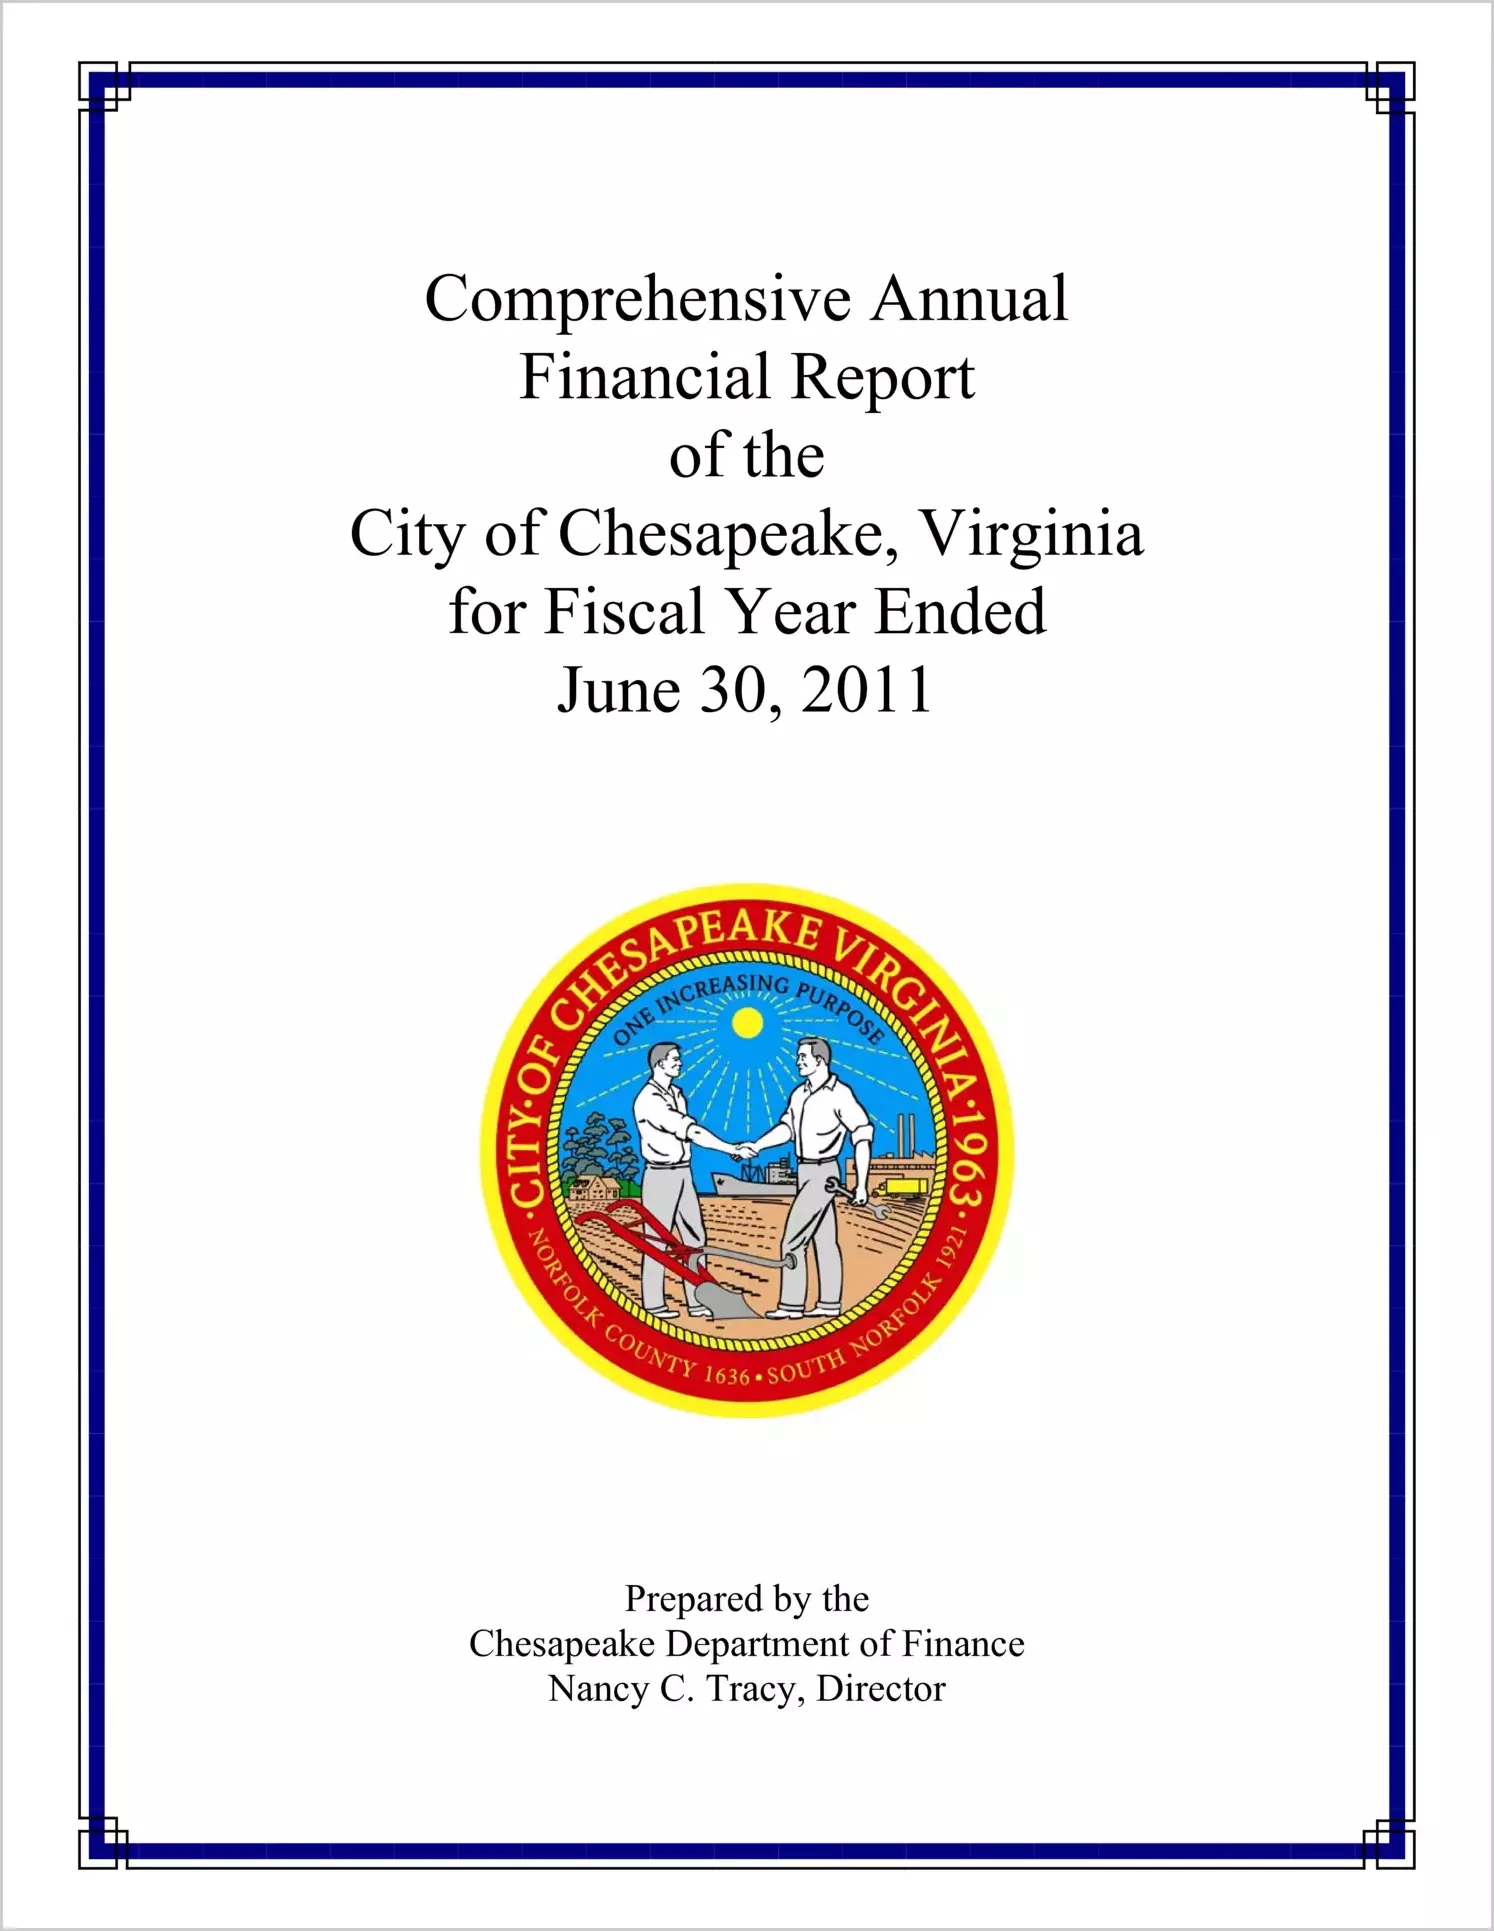 2011 Annual Financial Report for City of Chesapeake